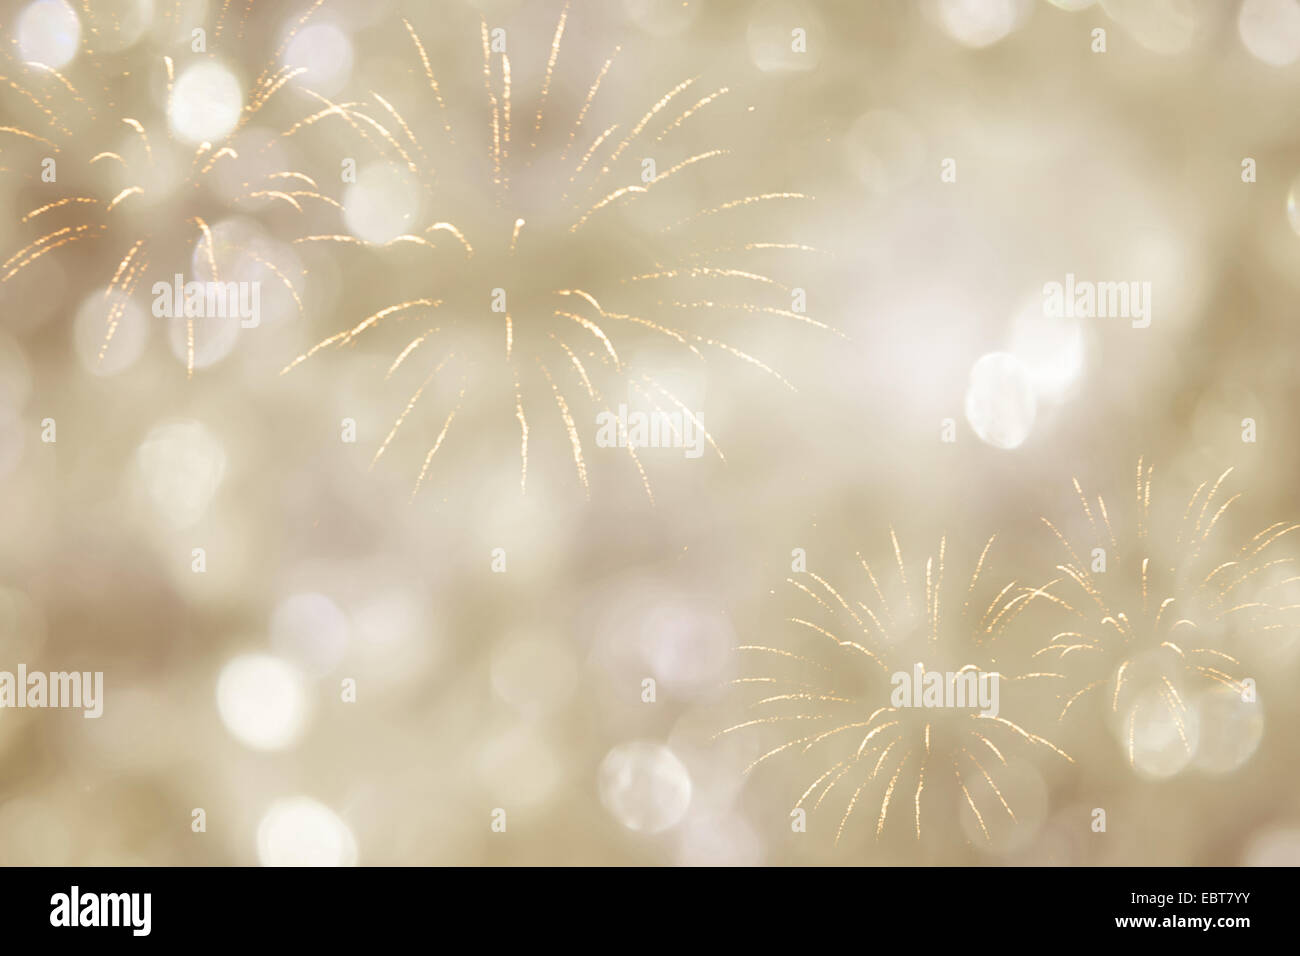 new years background with fireworks Stock Photo